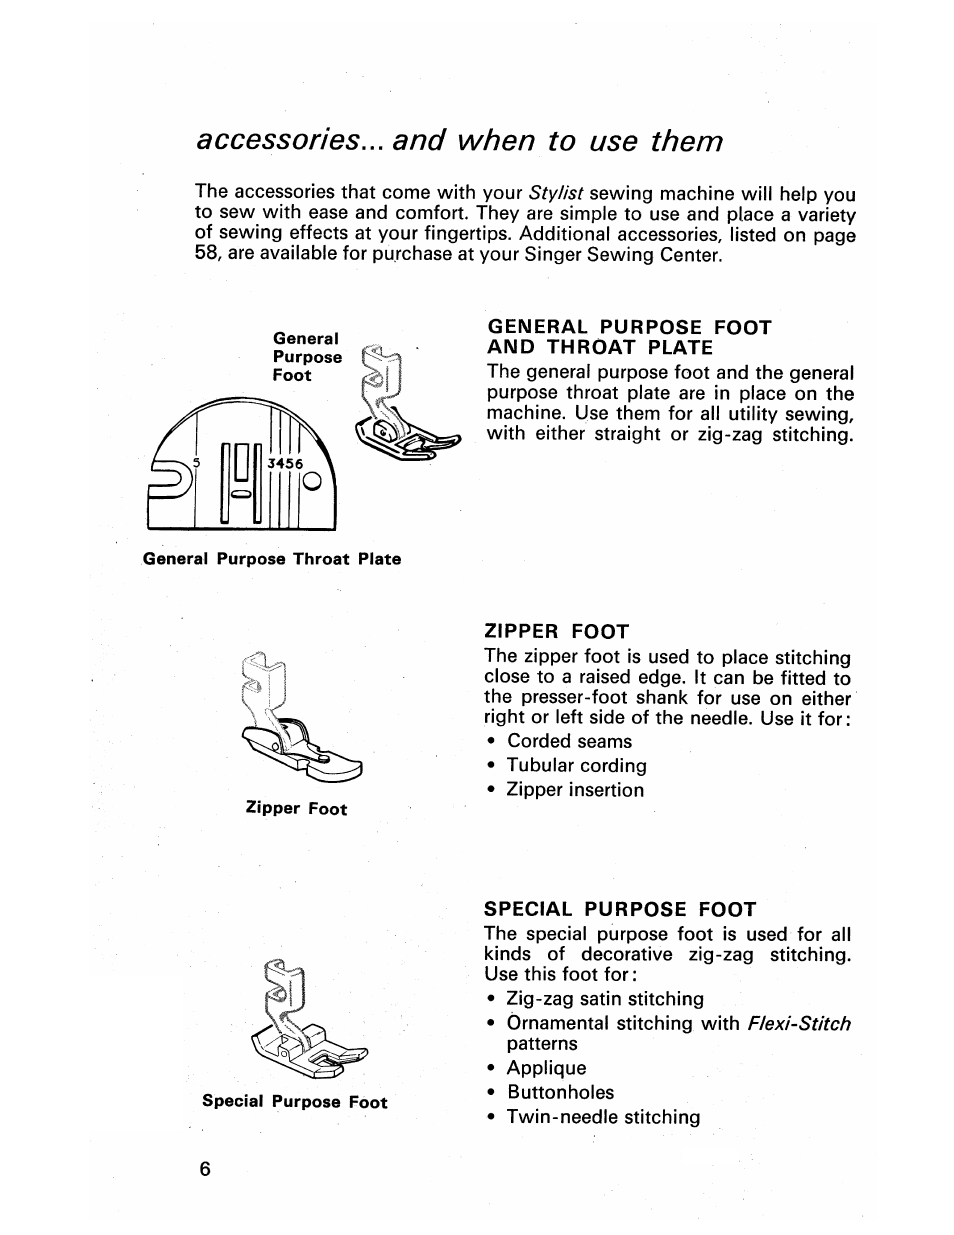 Accessories... and when to use them, General purpose foot and throat plate, Zipper foot | Special purpose foot | SINGER 413 User Manual | Page 8 / 64